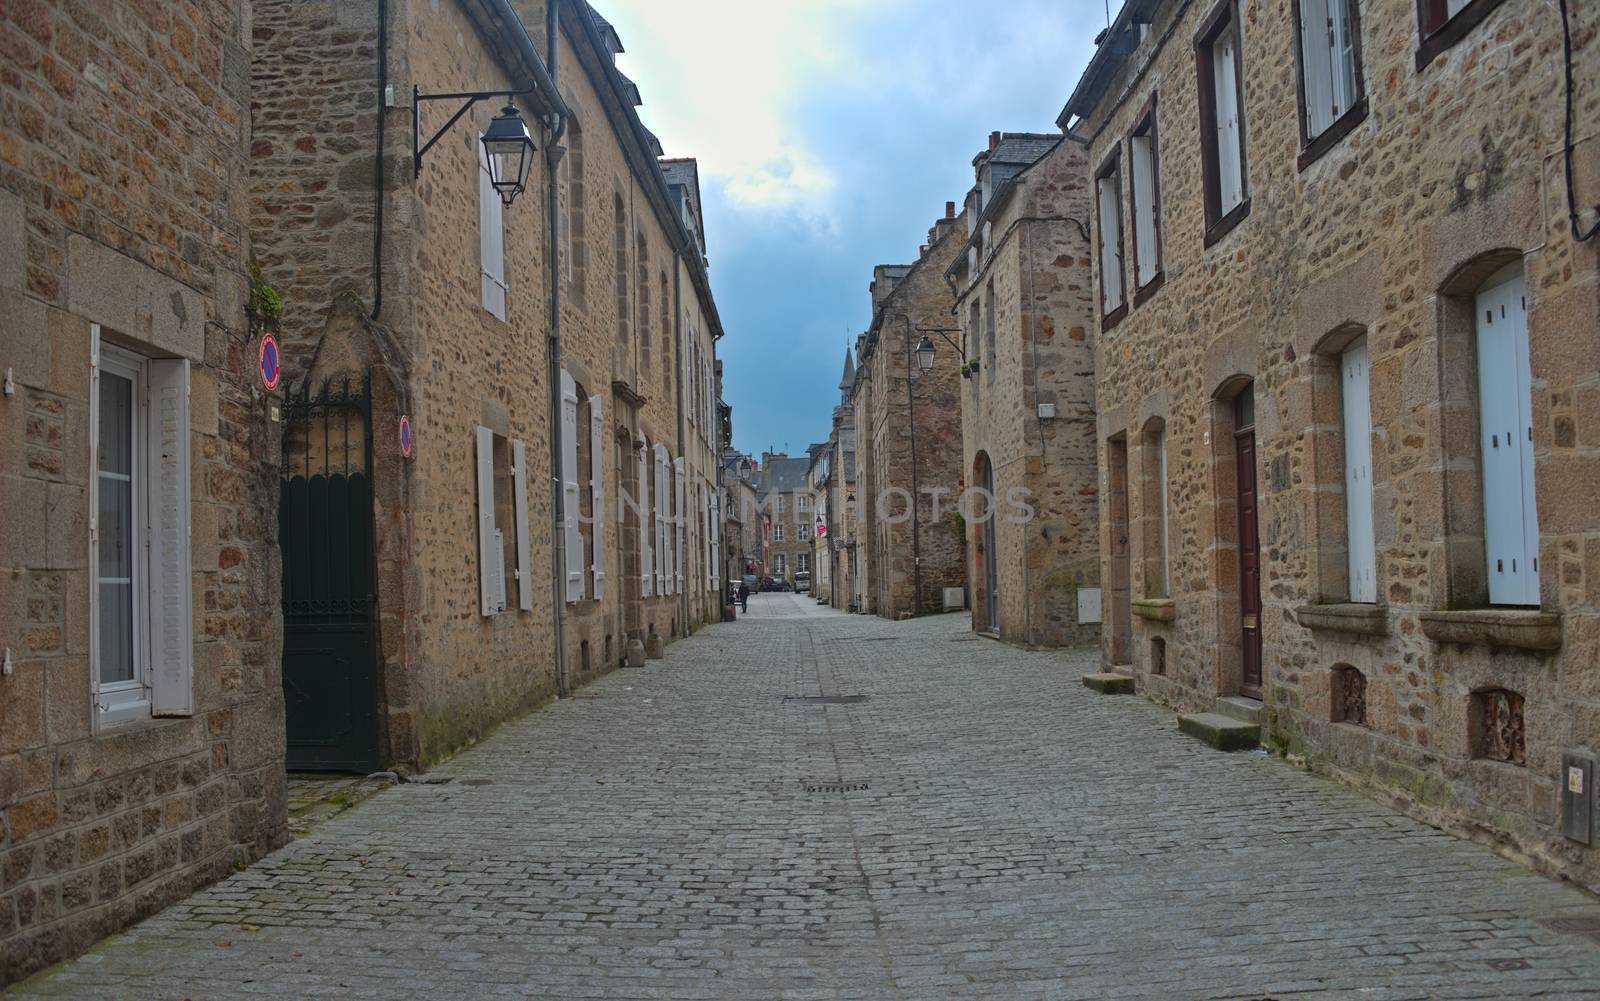 Empty street with traditional stone houses at Dinan, France by sheriffkule